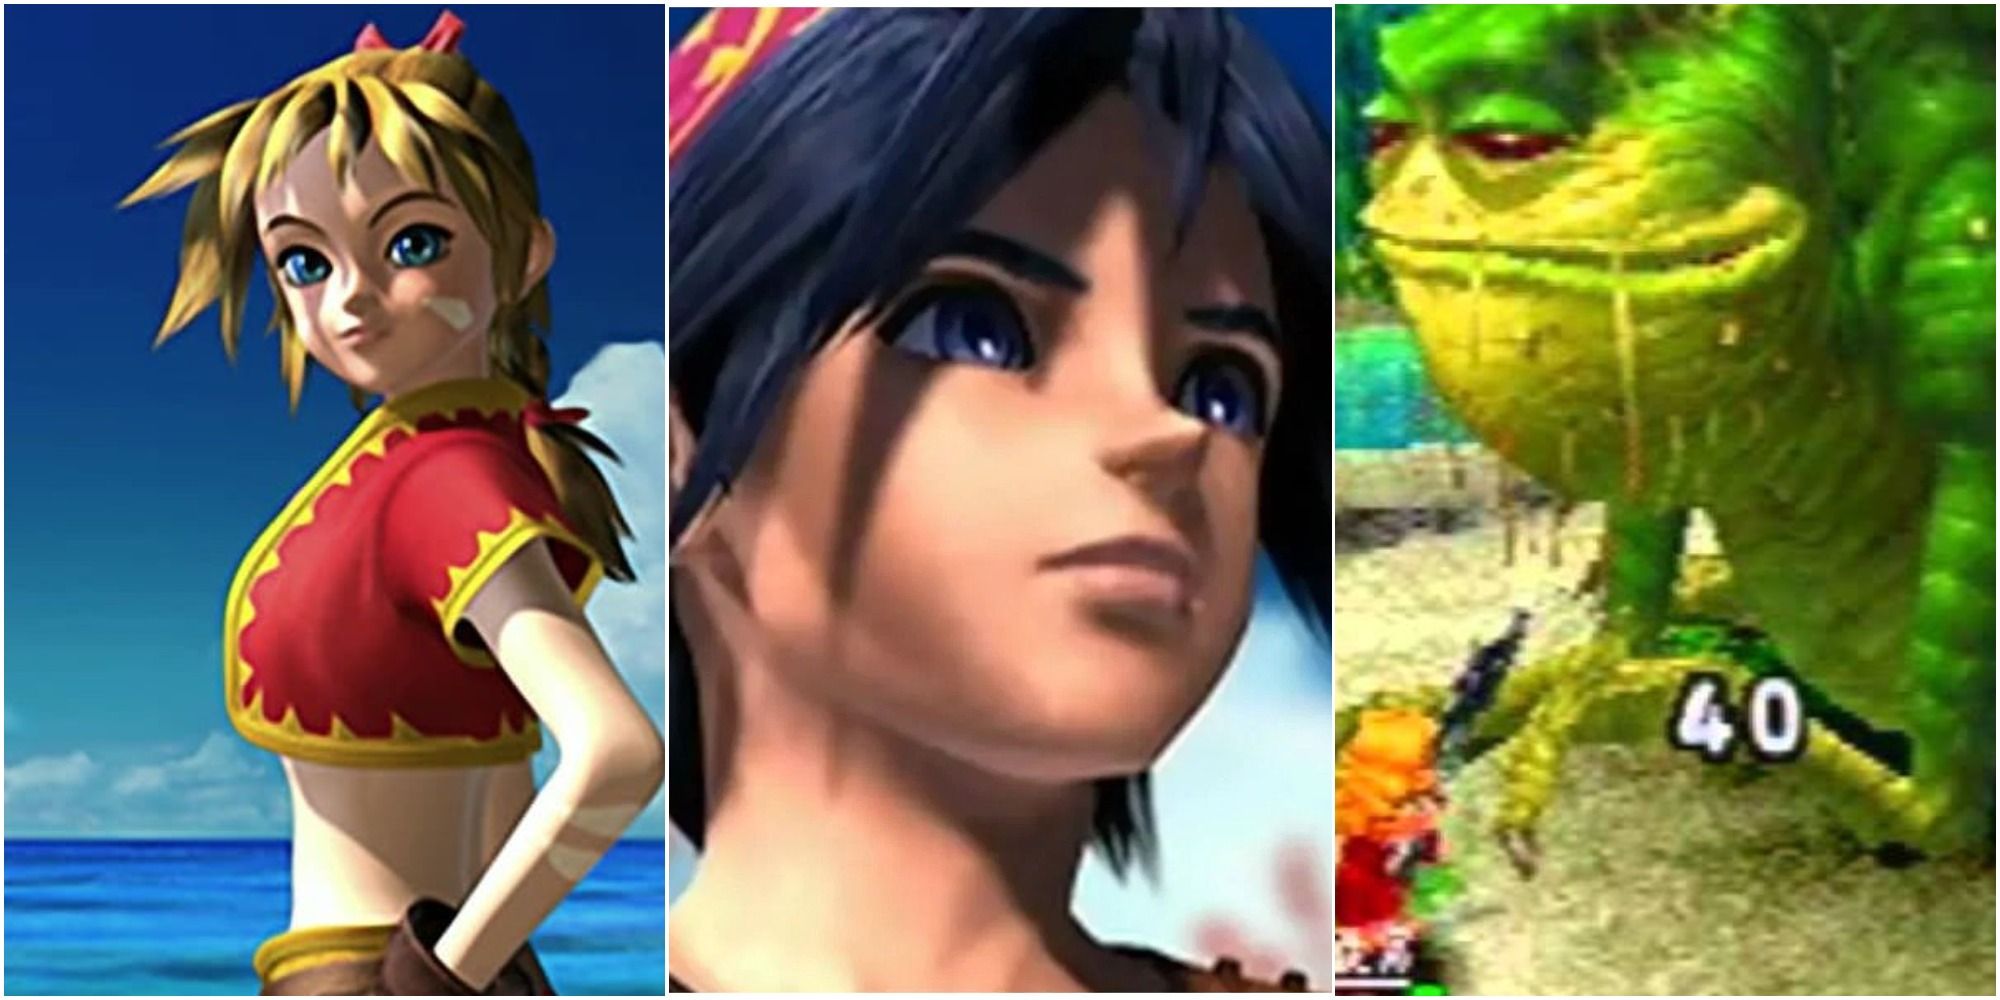 Leaked Chrono Cross Mobile Game Crossover Could Be More Evidence